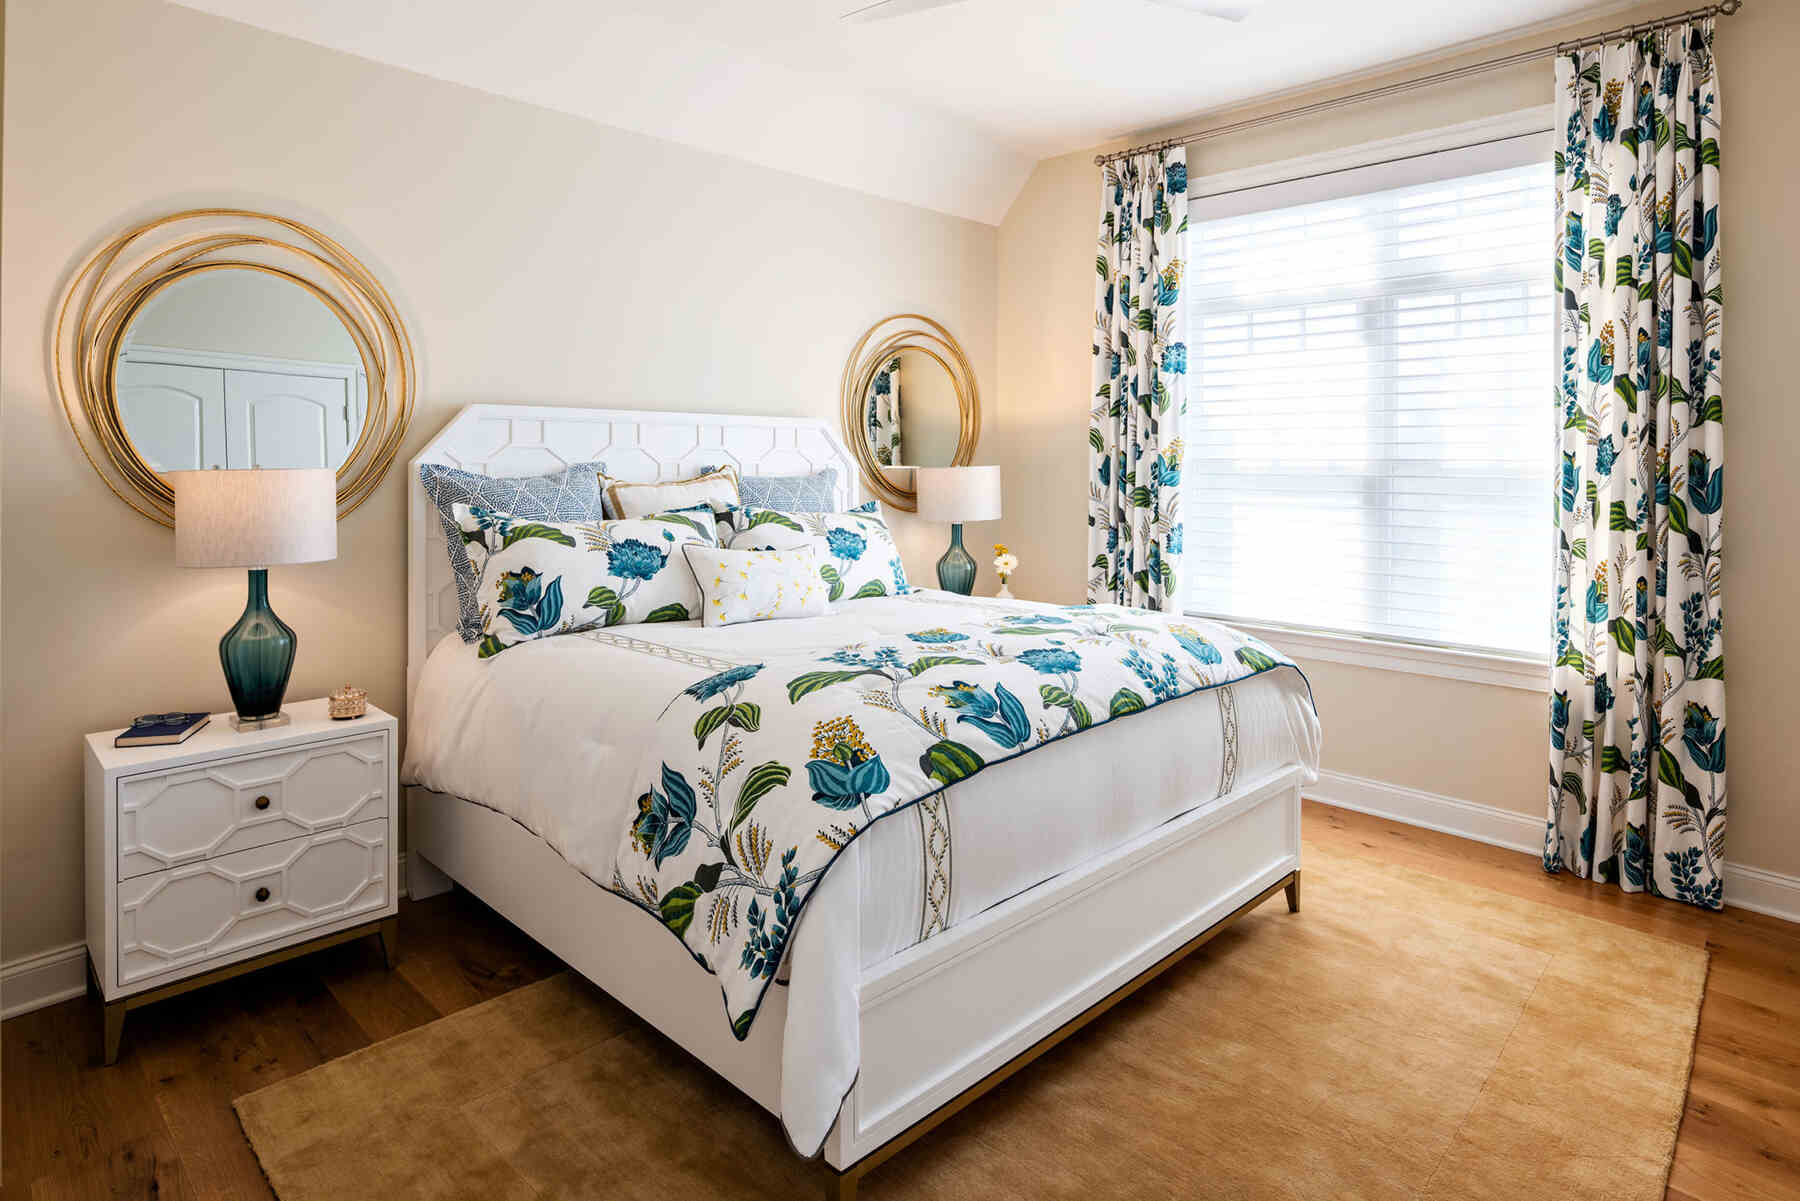 Bedroom with blue floral accents, matching side tables, lamps and mirrors